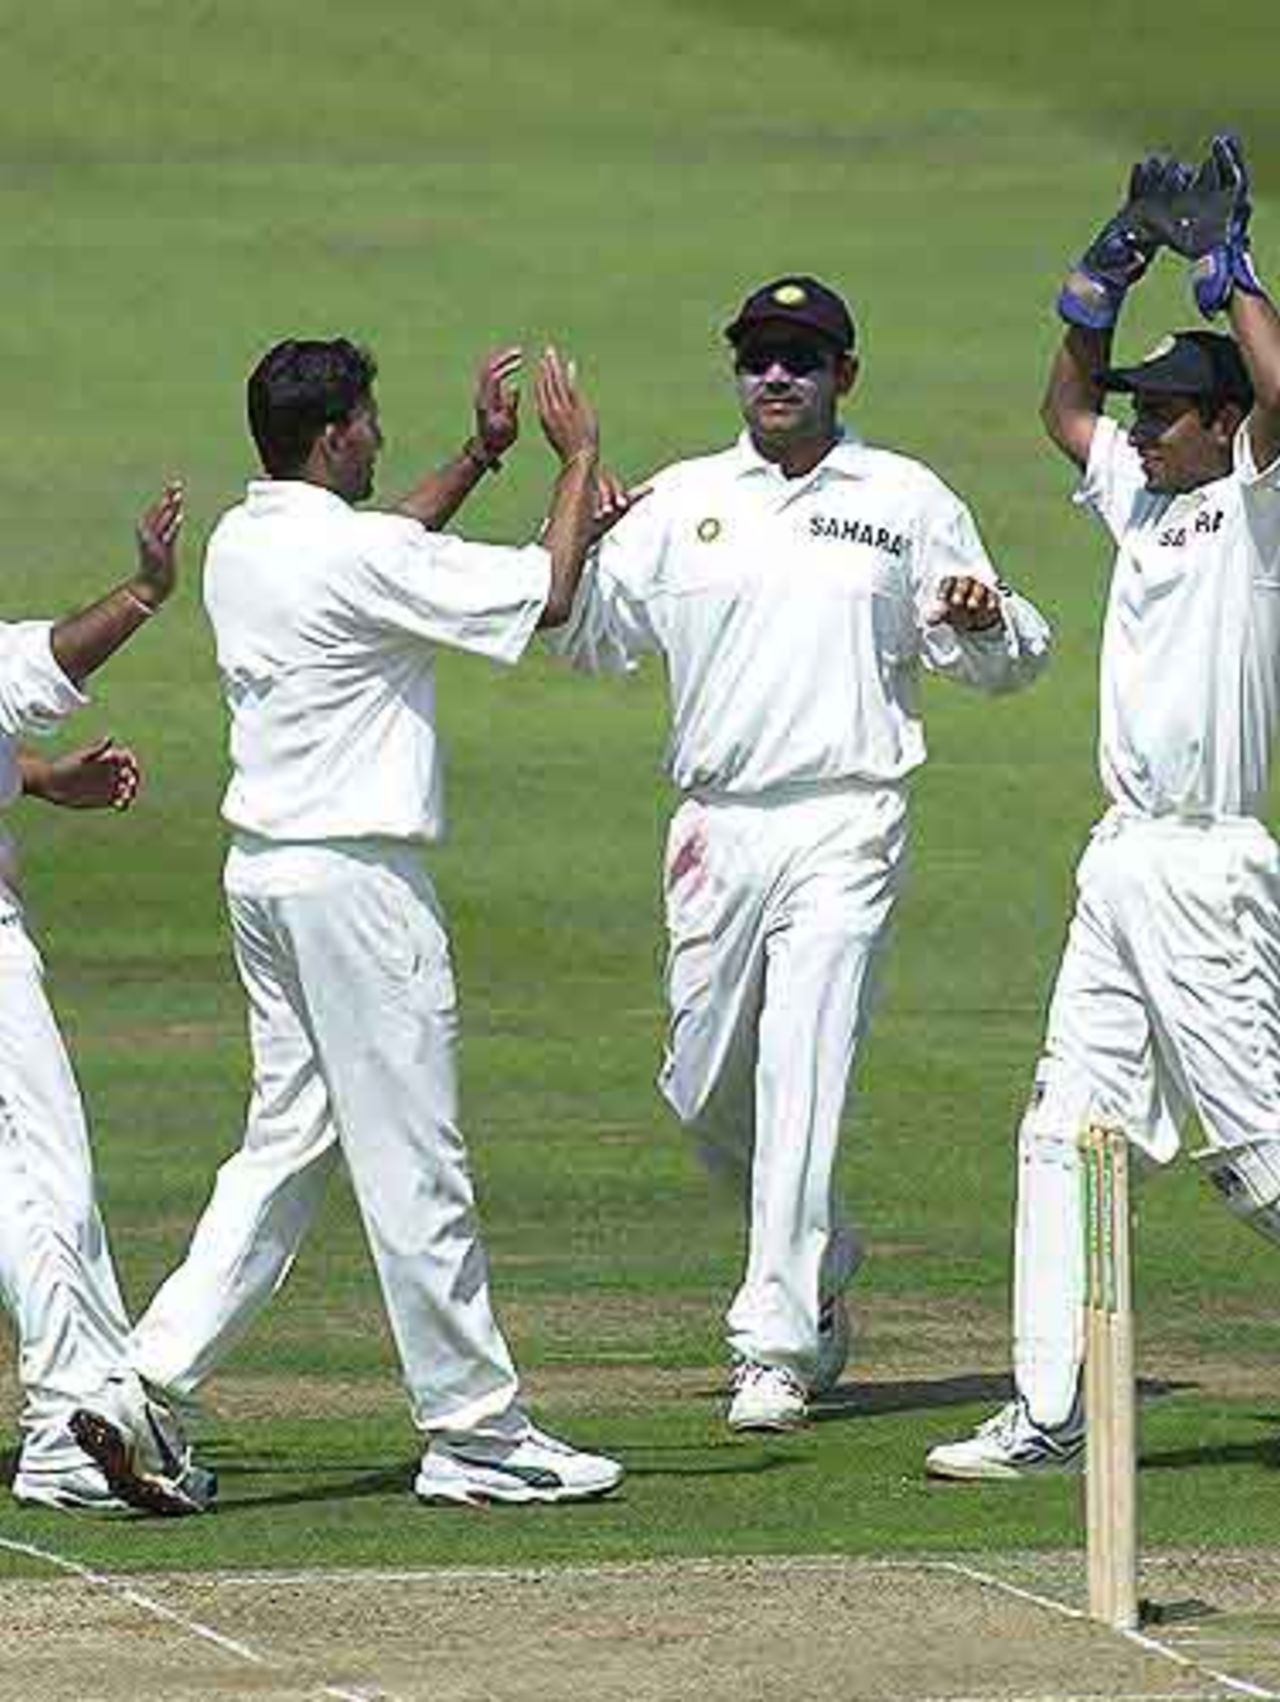 Agarkar is congratulatd by Sehwag on getting the wicket of Nasser Hussain, 1st npower Test at Lord's